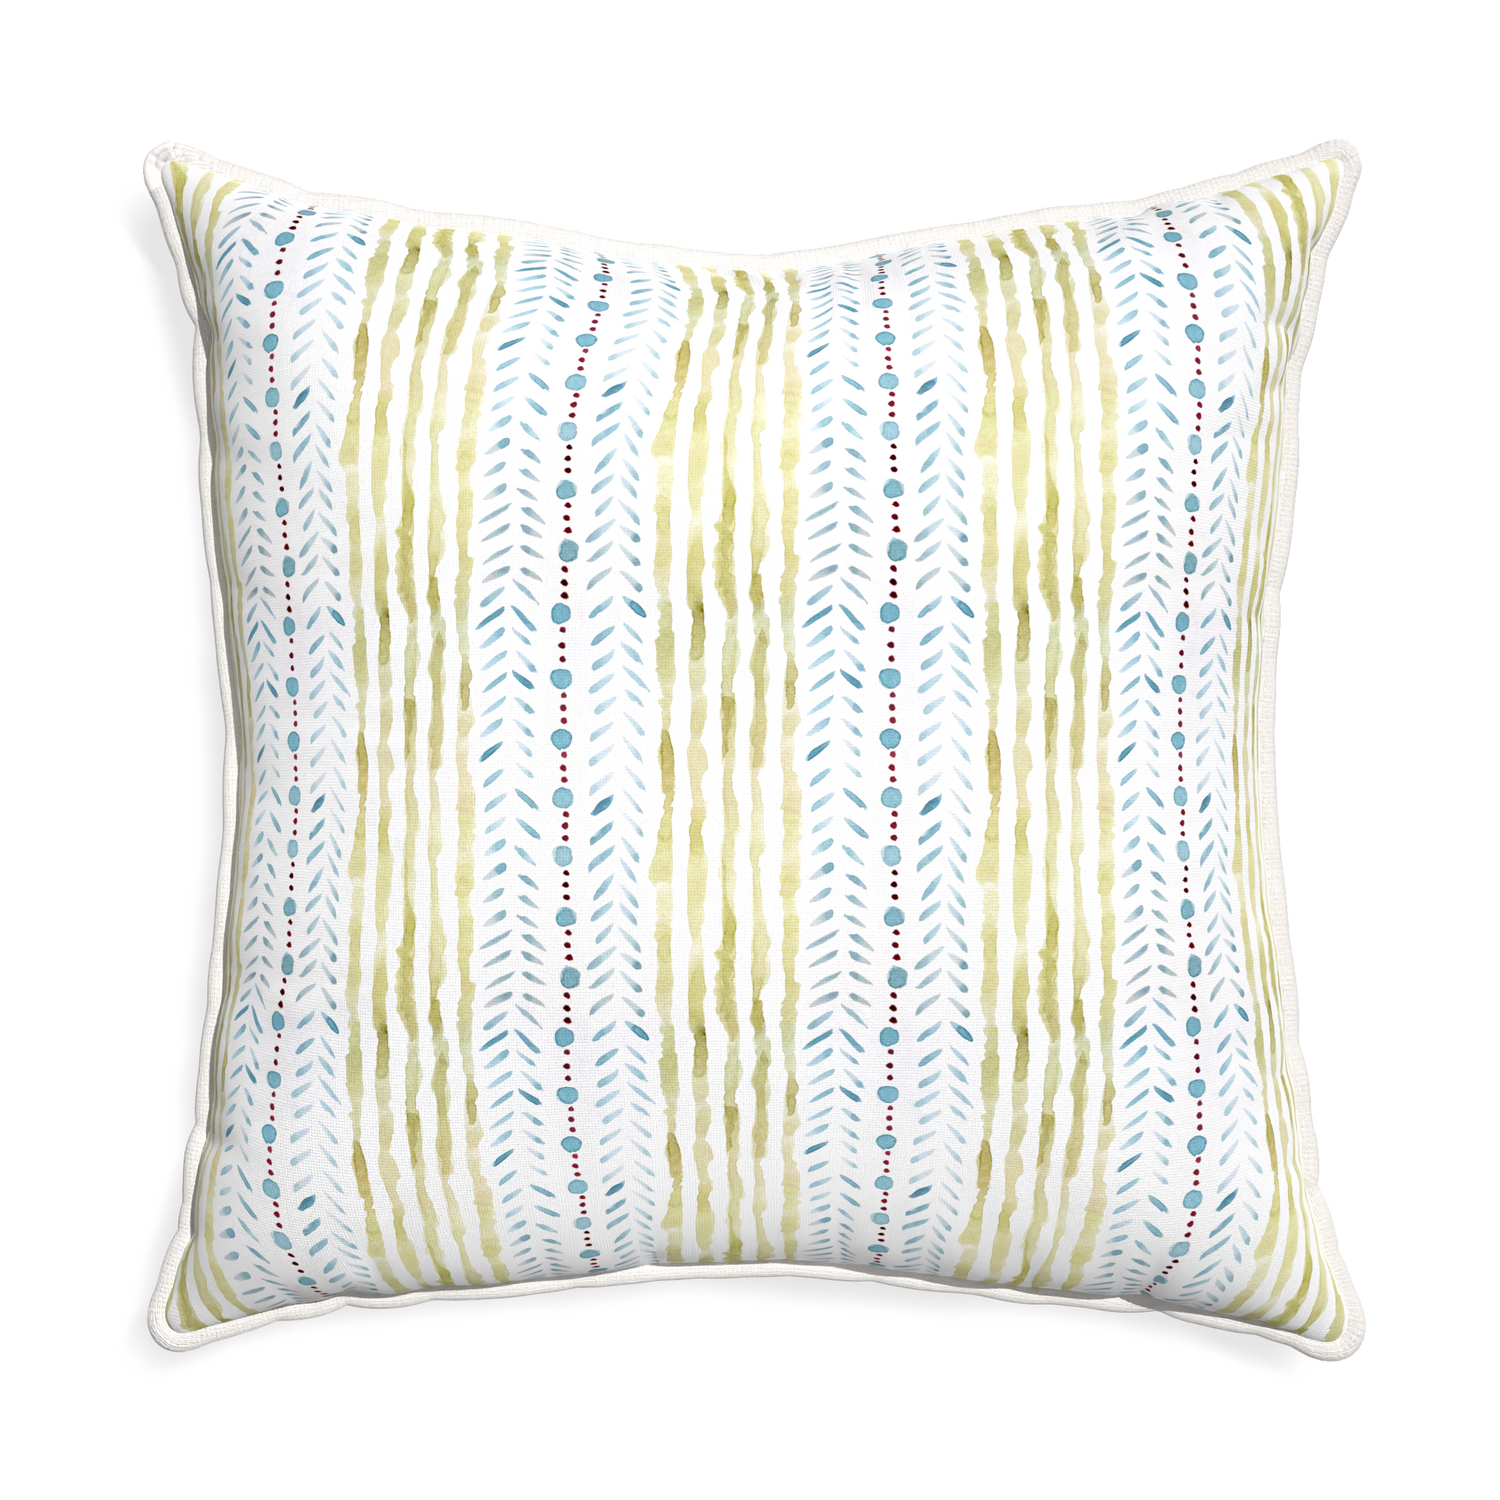 Euro-sham julia custom pillow with snow piping on white background